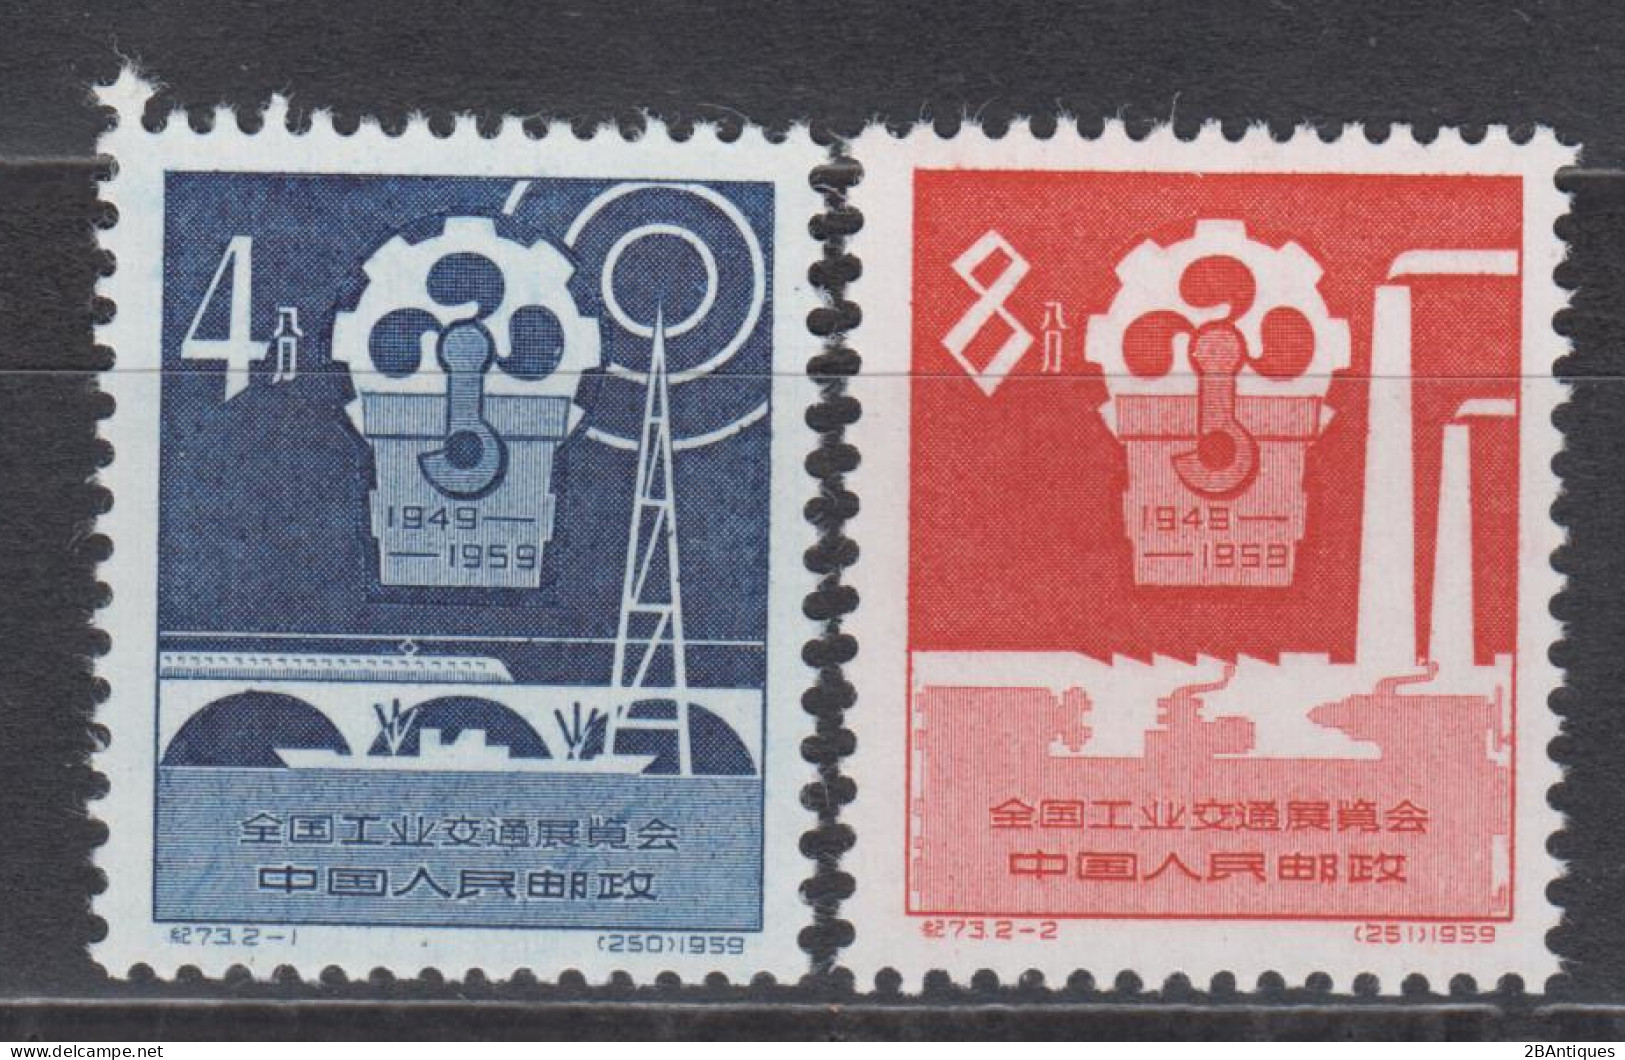 PR CHINA 1959 - National Exhibition Of Industry And Communications MNH** XF - Ongebruikt